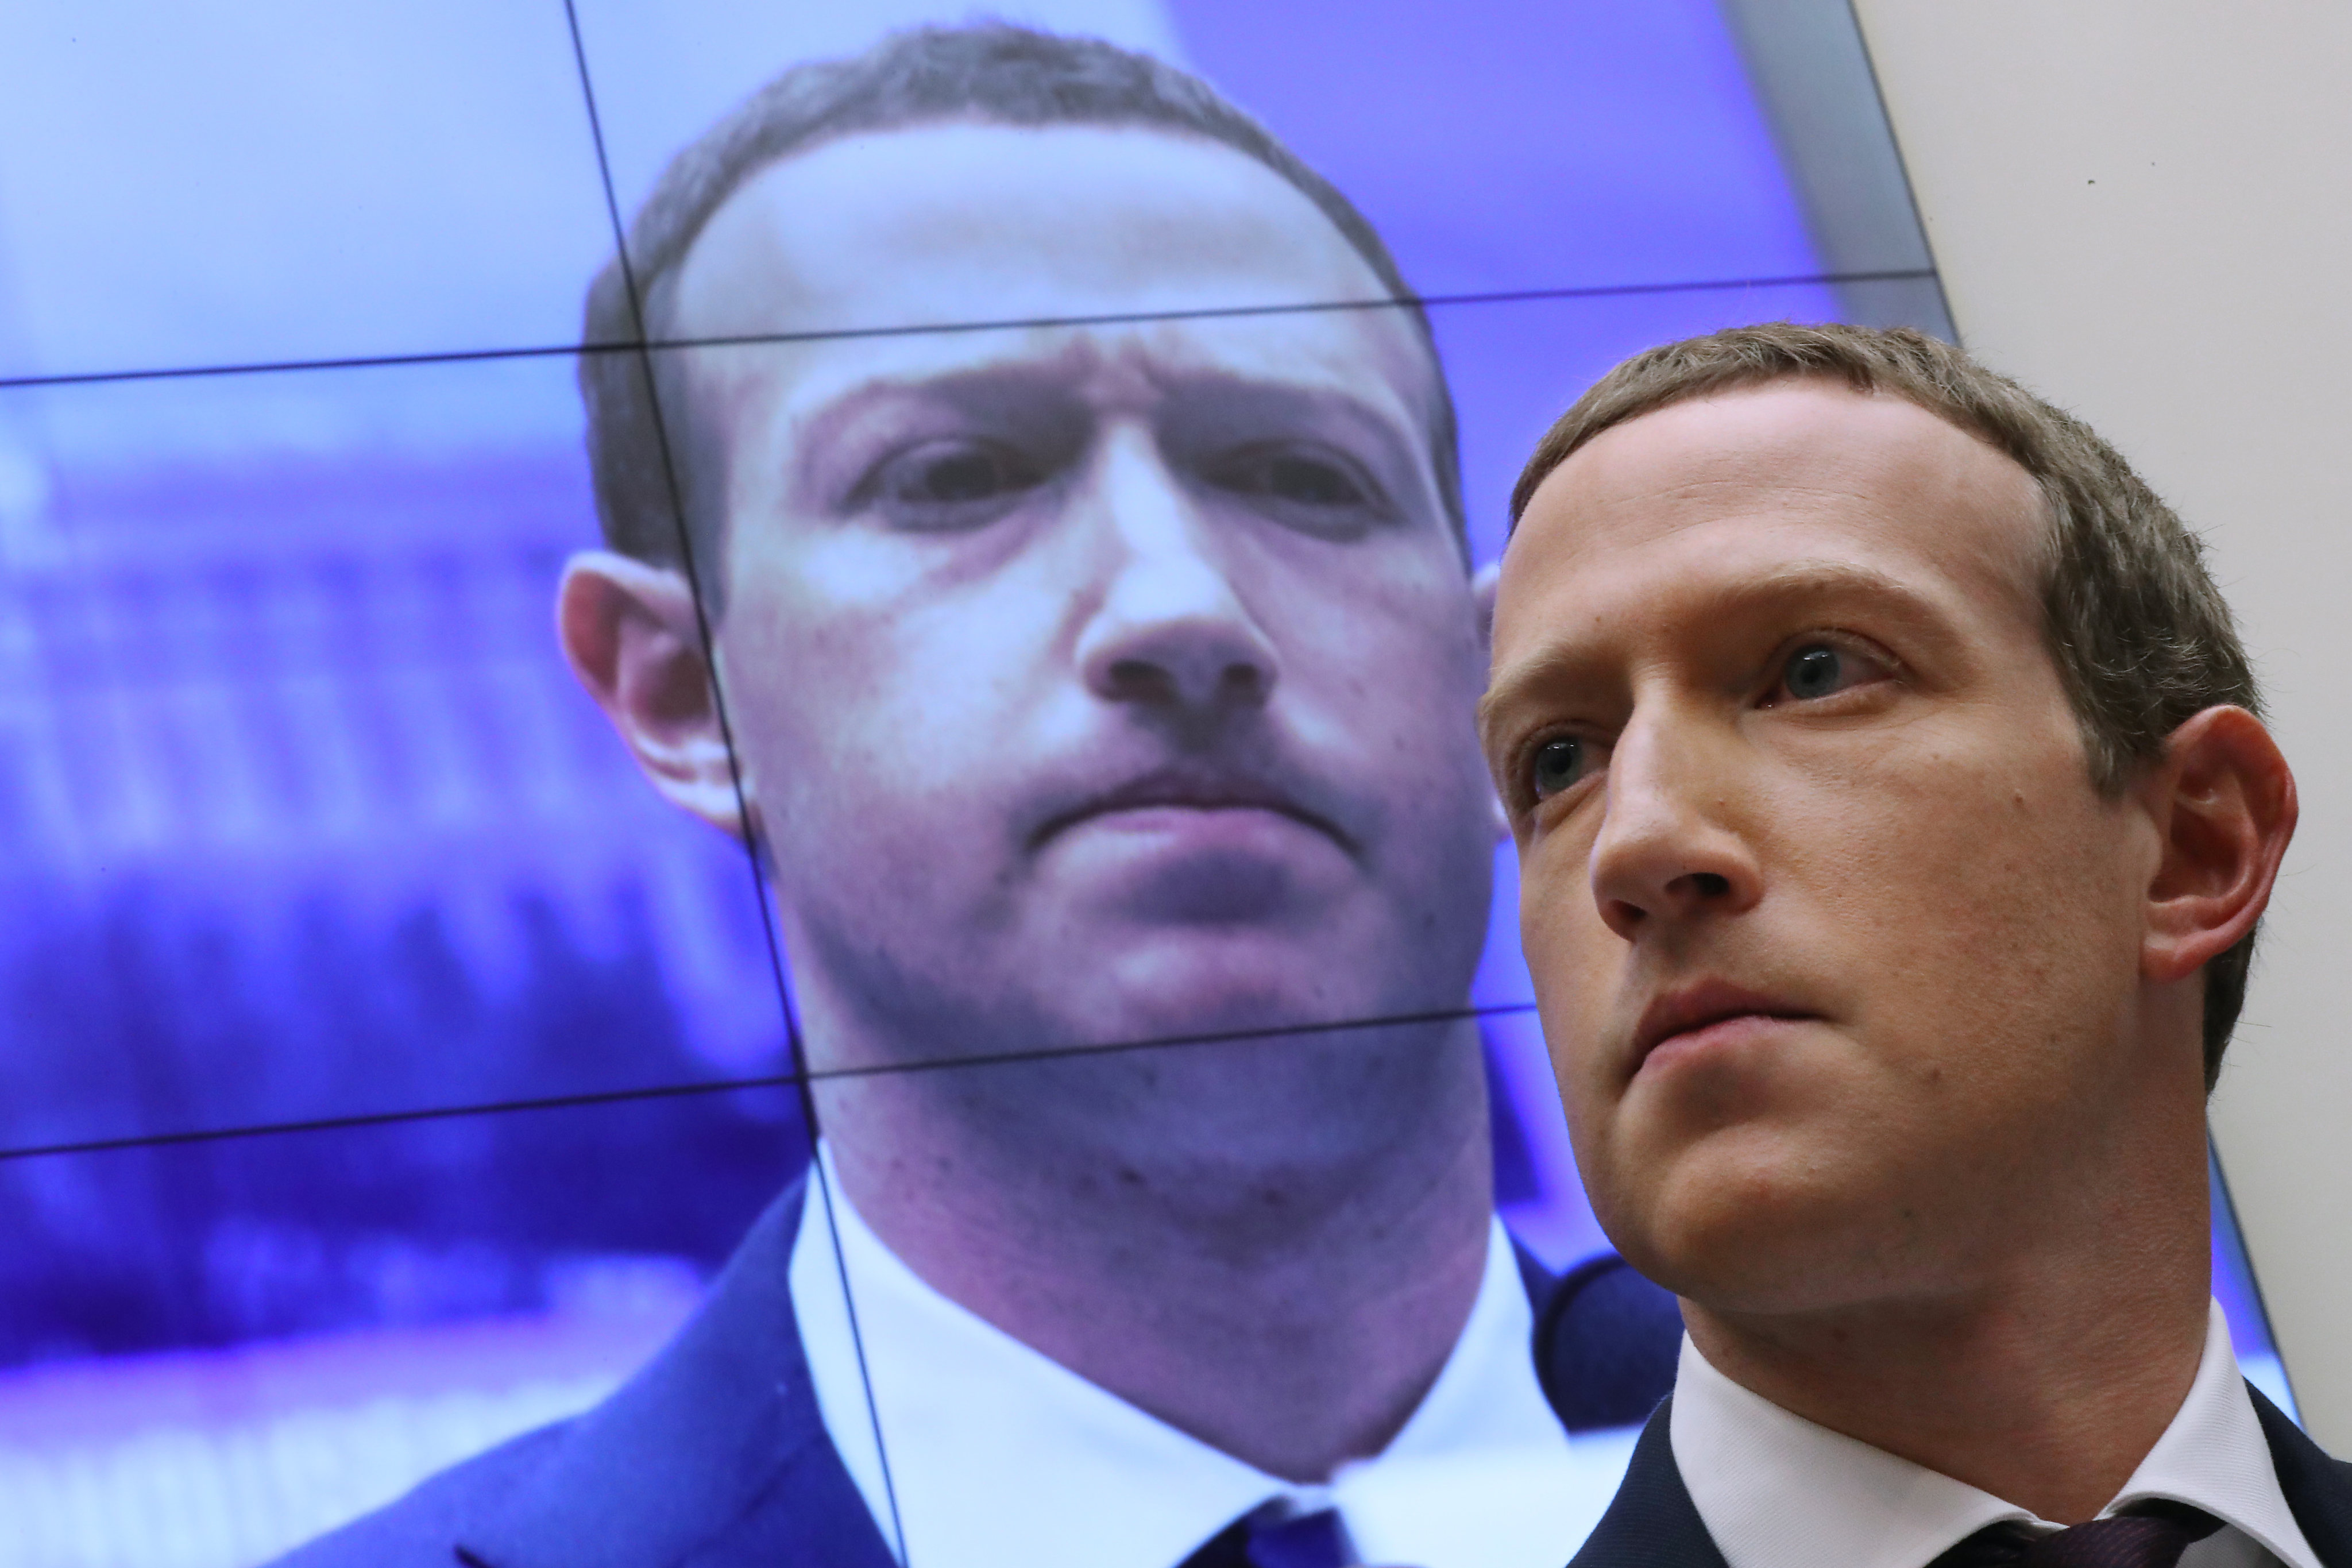 With an image of himself on a screen in the background, Mark Zuckerberg testifies before the House Financial Services Committee on Capitol Hill in 2019. Photo: Getty Images/TNS